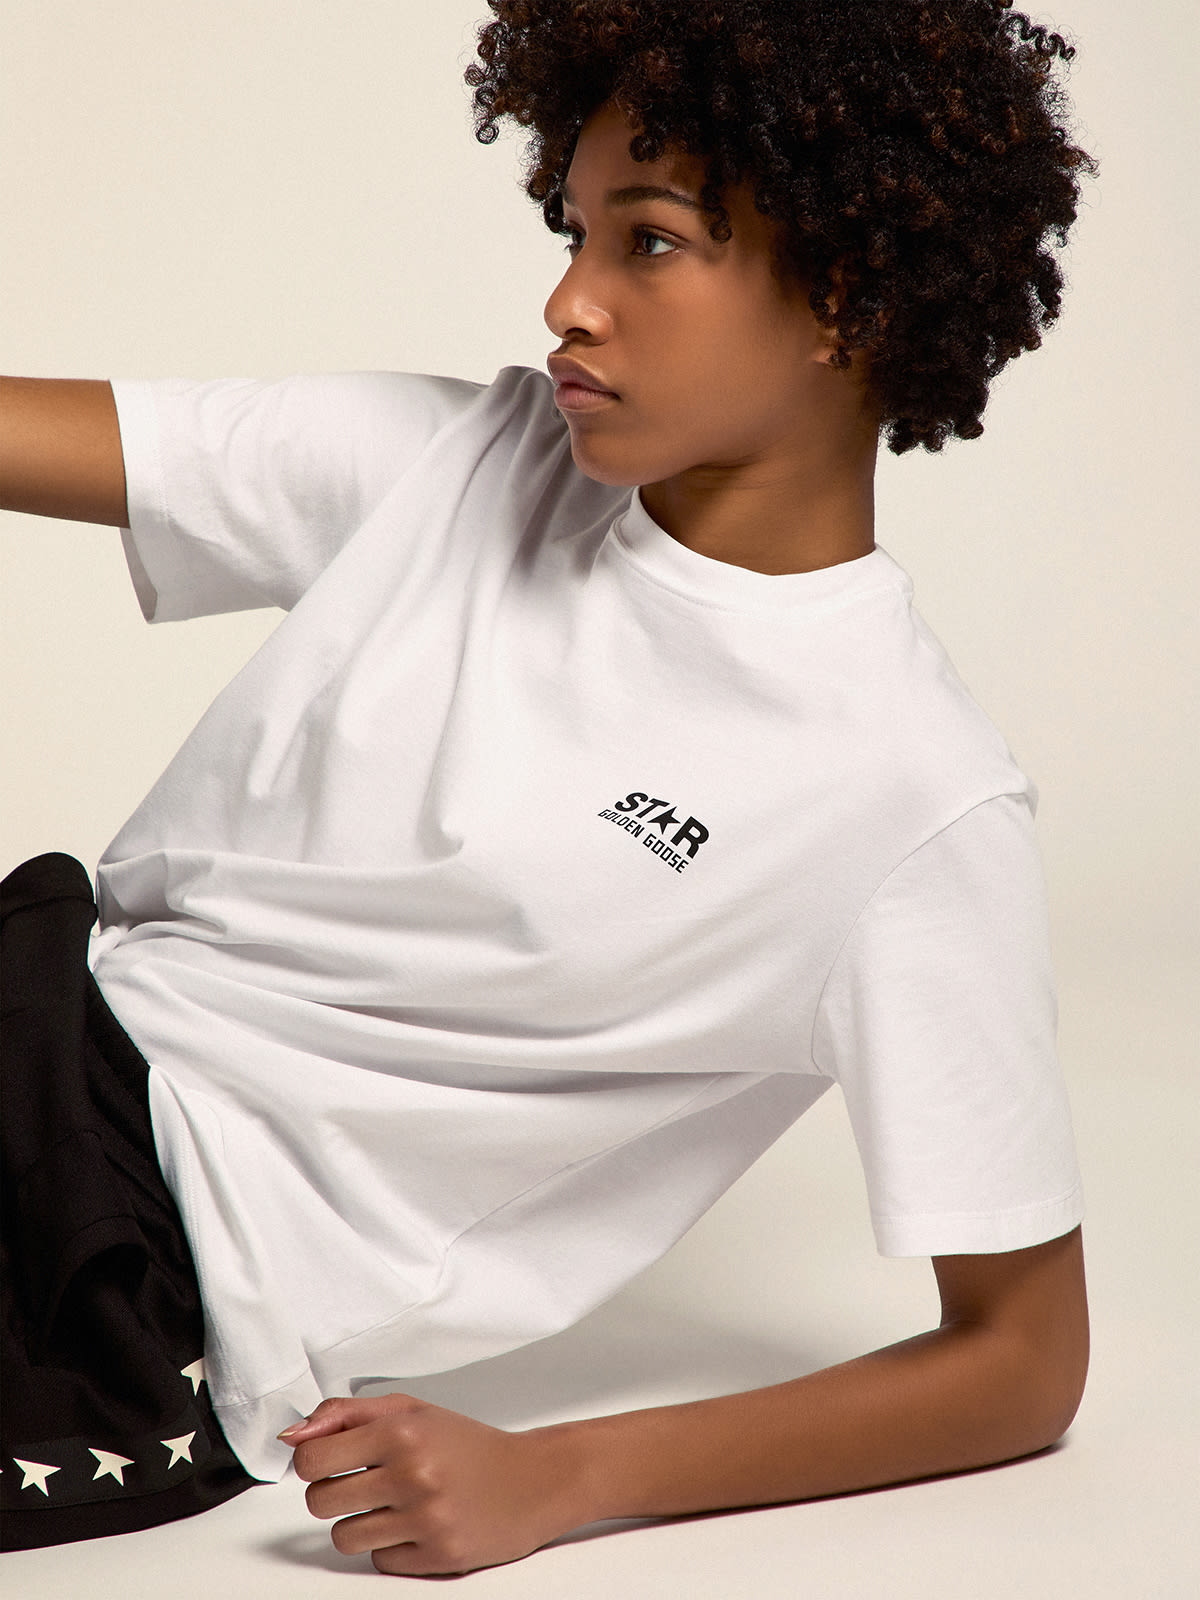 Golden Goose - Women's white T-shirt with contrasting black logo and star in 